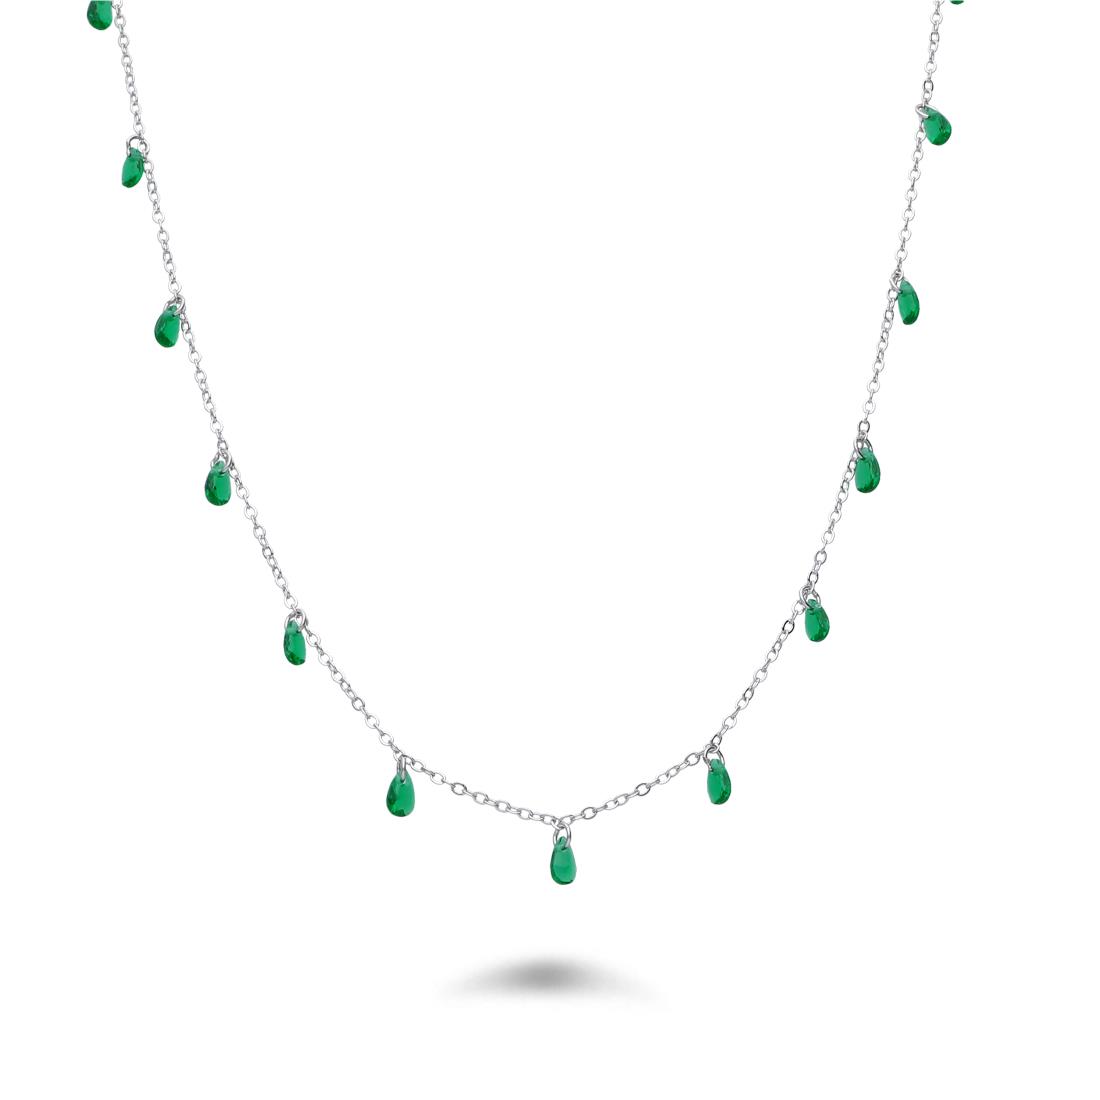 Silver necklace with green zircons - LUXURY MILANO